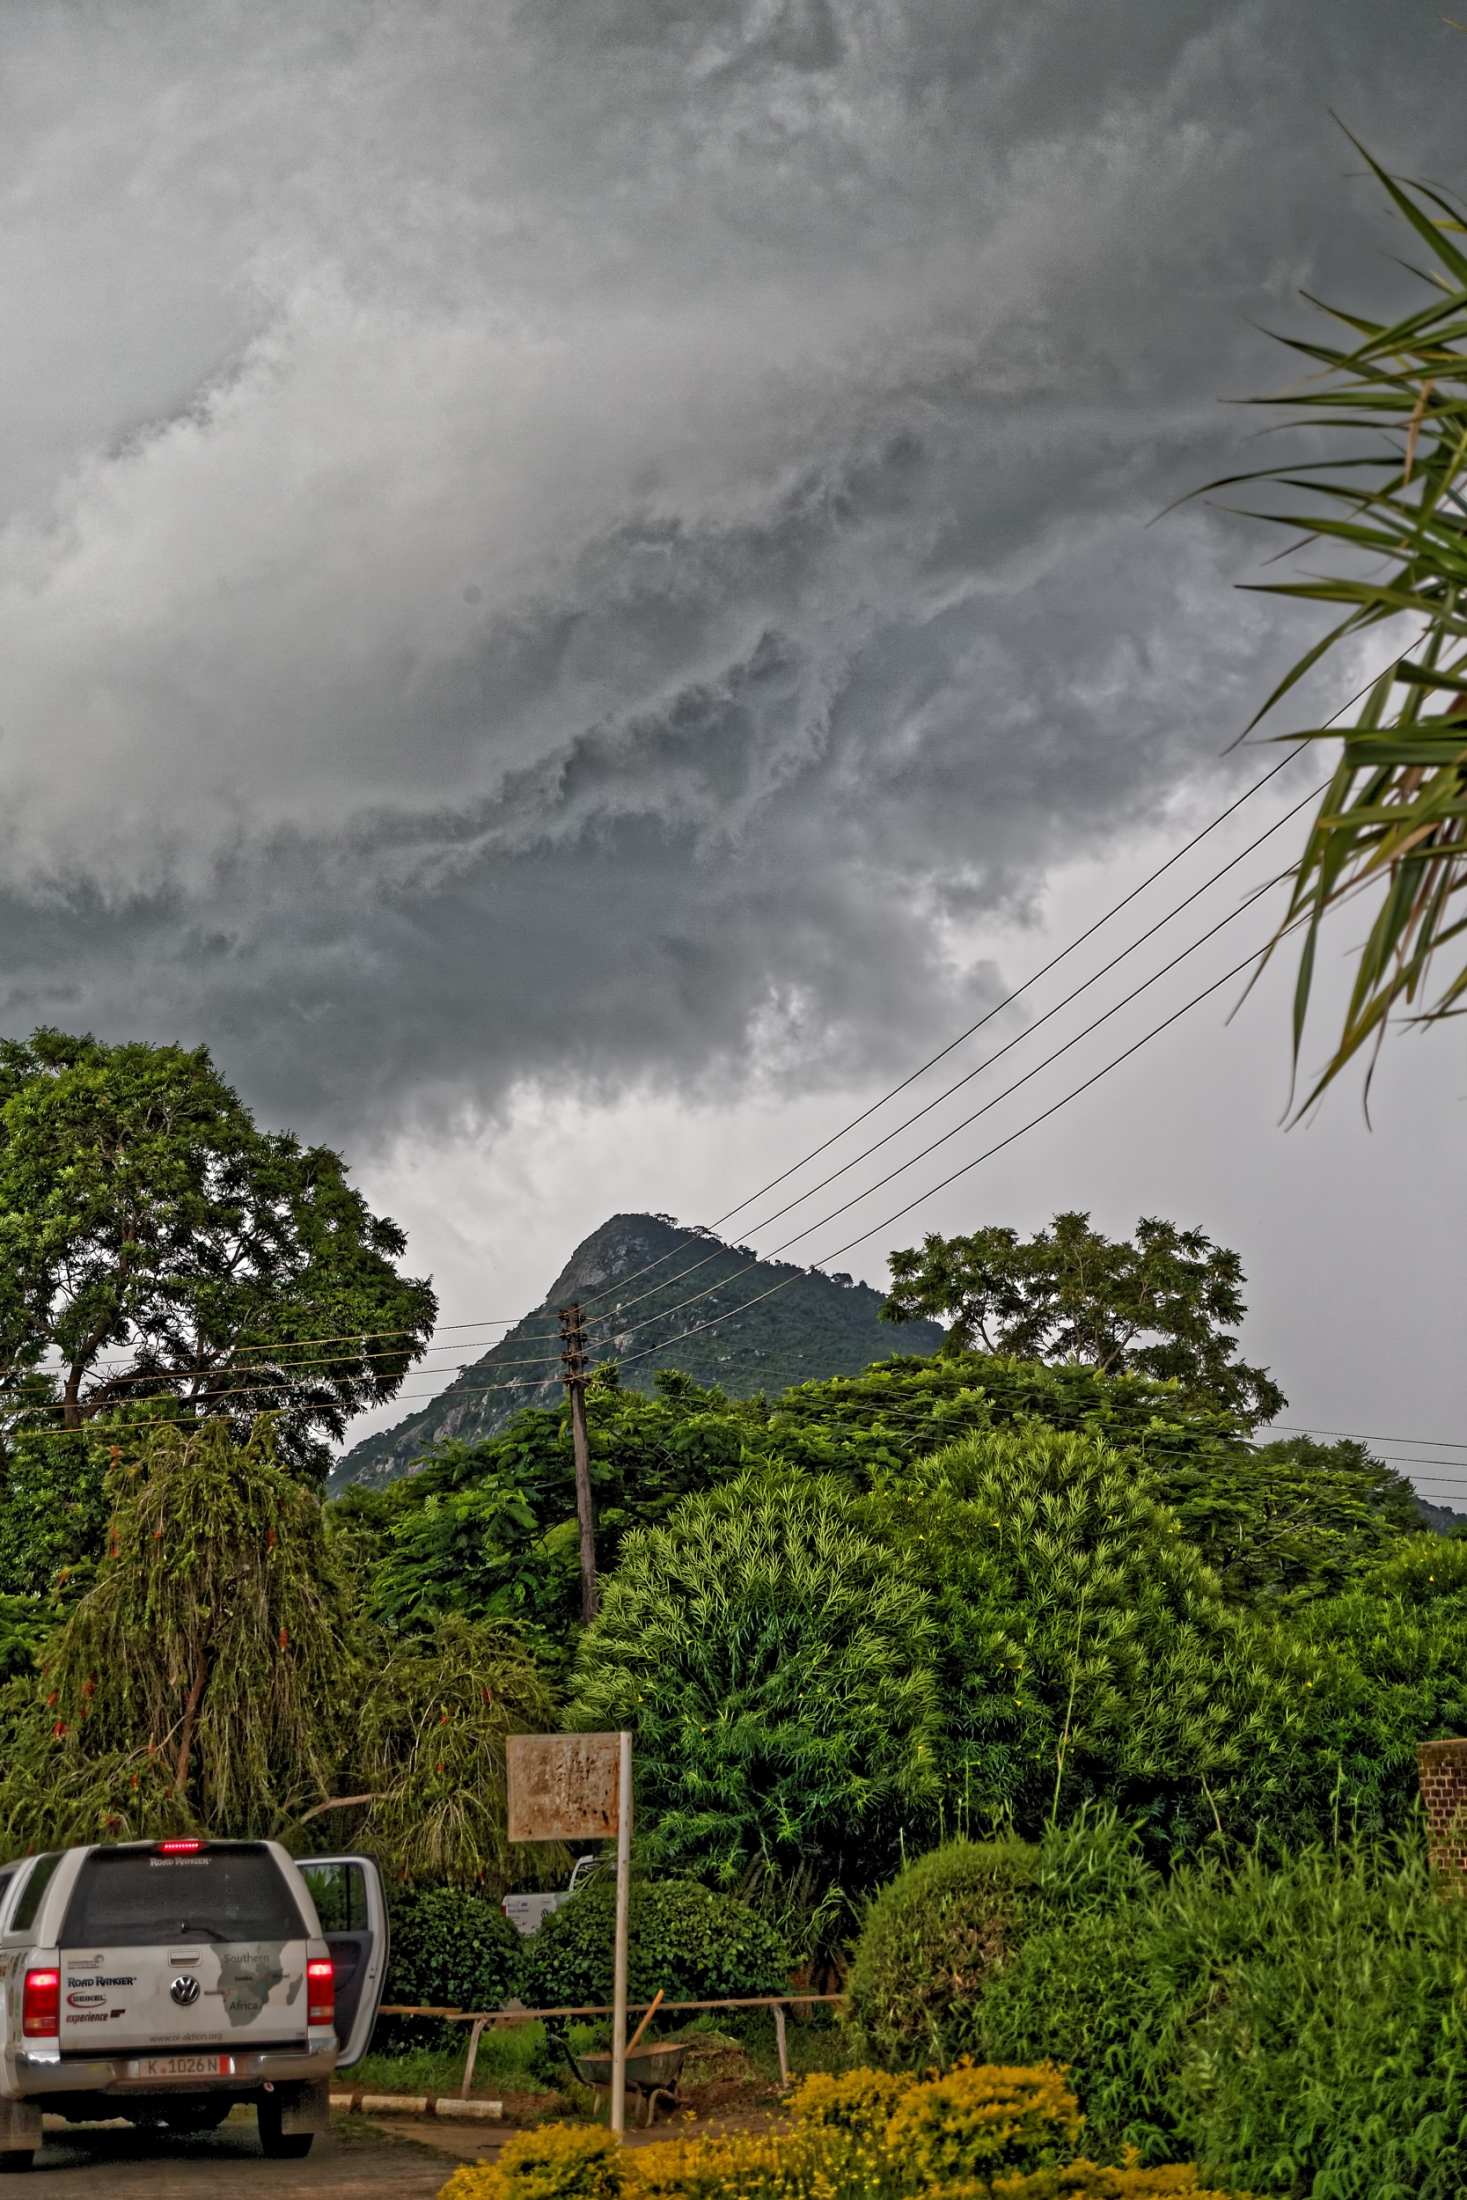 Thunderstorm over Malawi